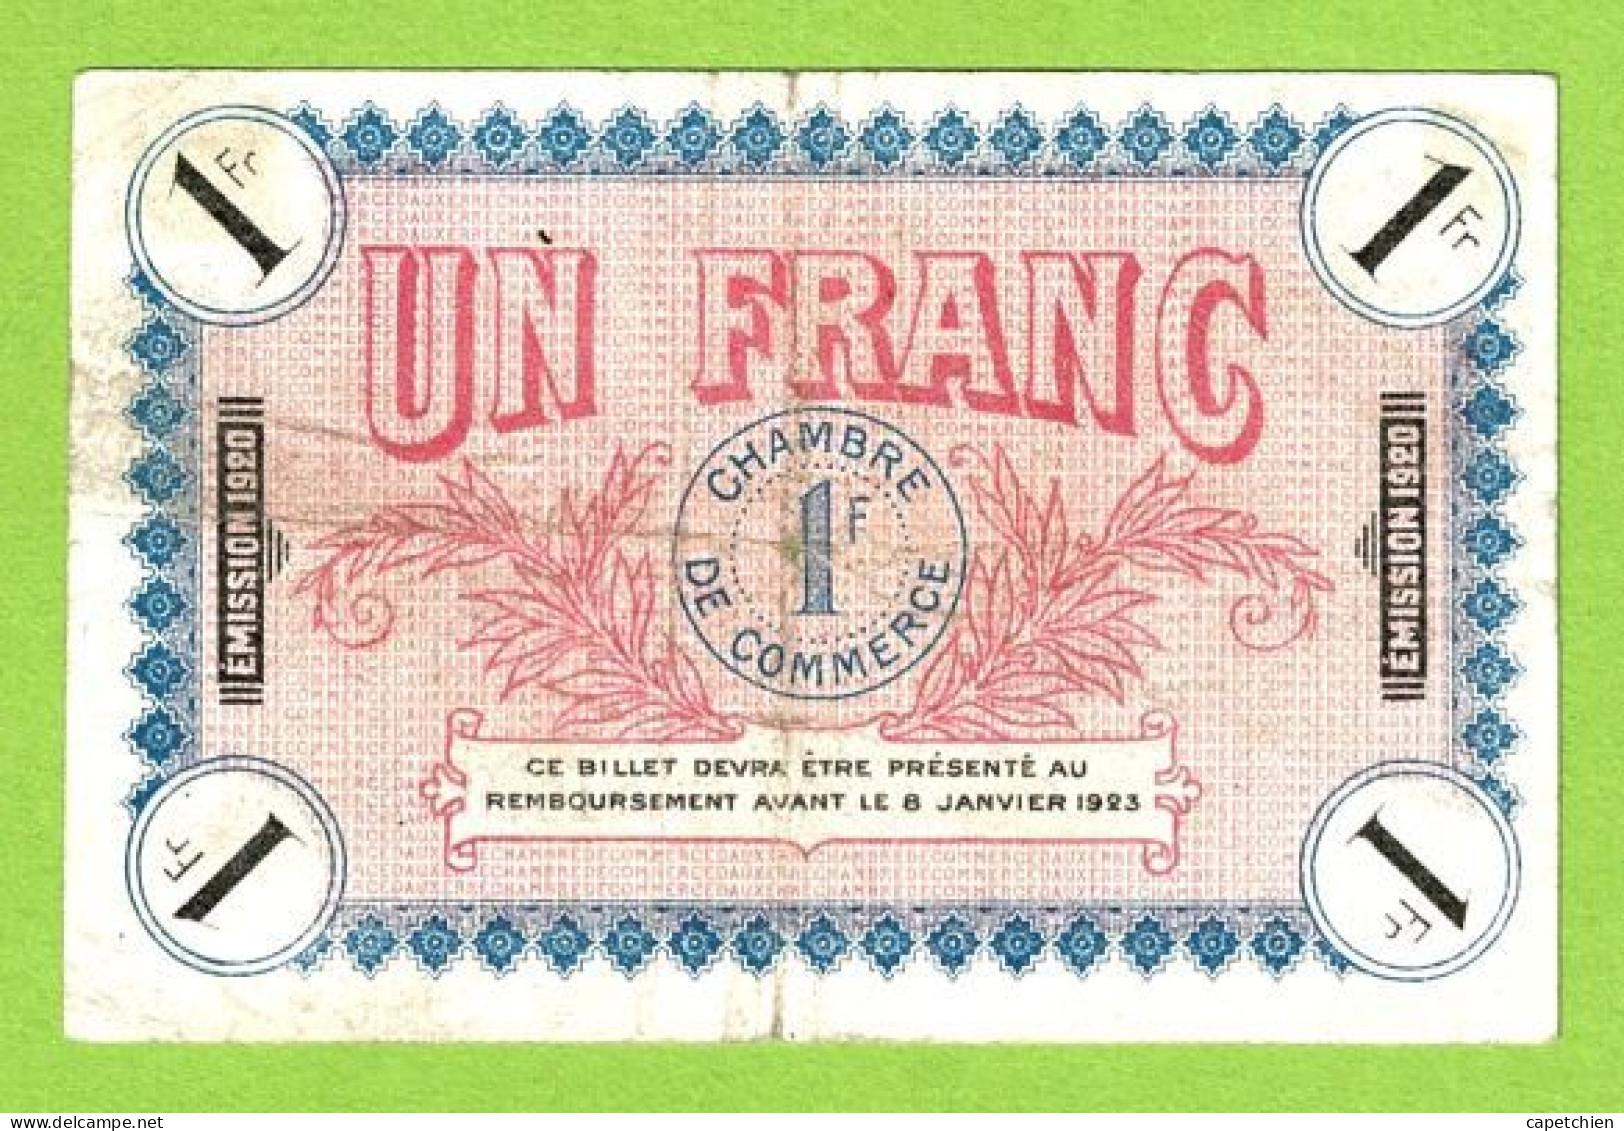 FRANCE / AUXERRE / 1 FRANC / 8 Janvier 1920 / N° 017948 / SERIE  150 - Chamber Of Commerce